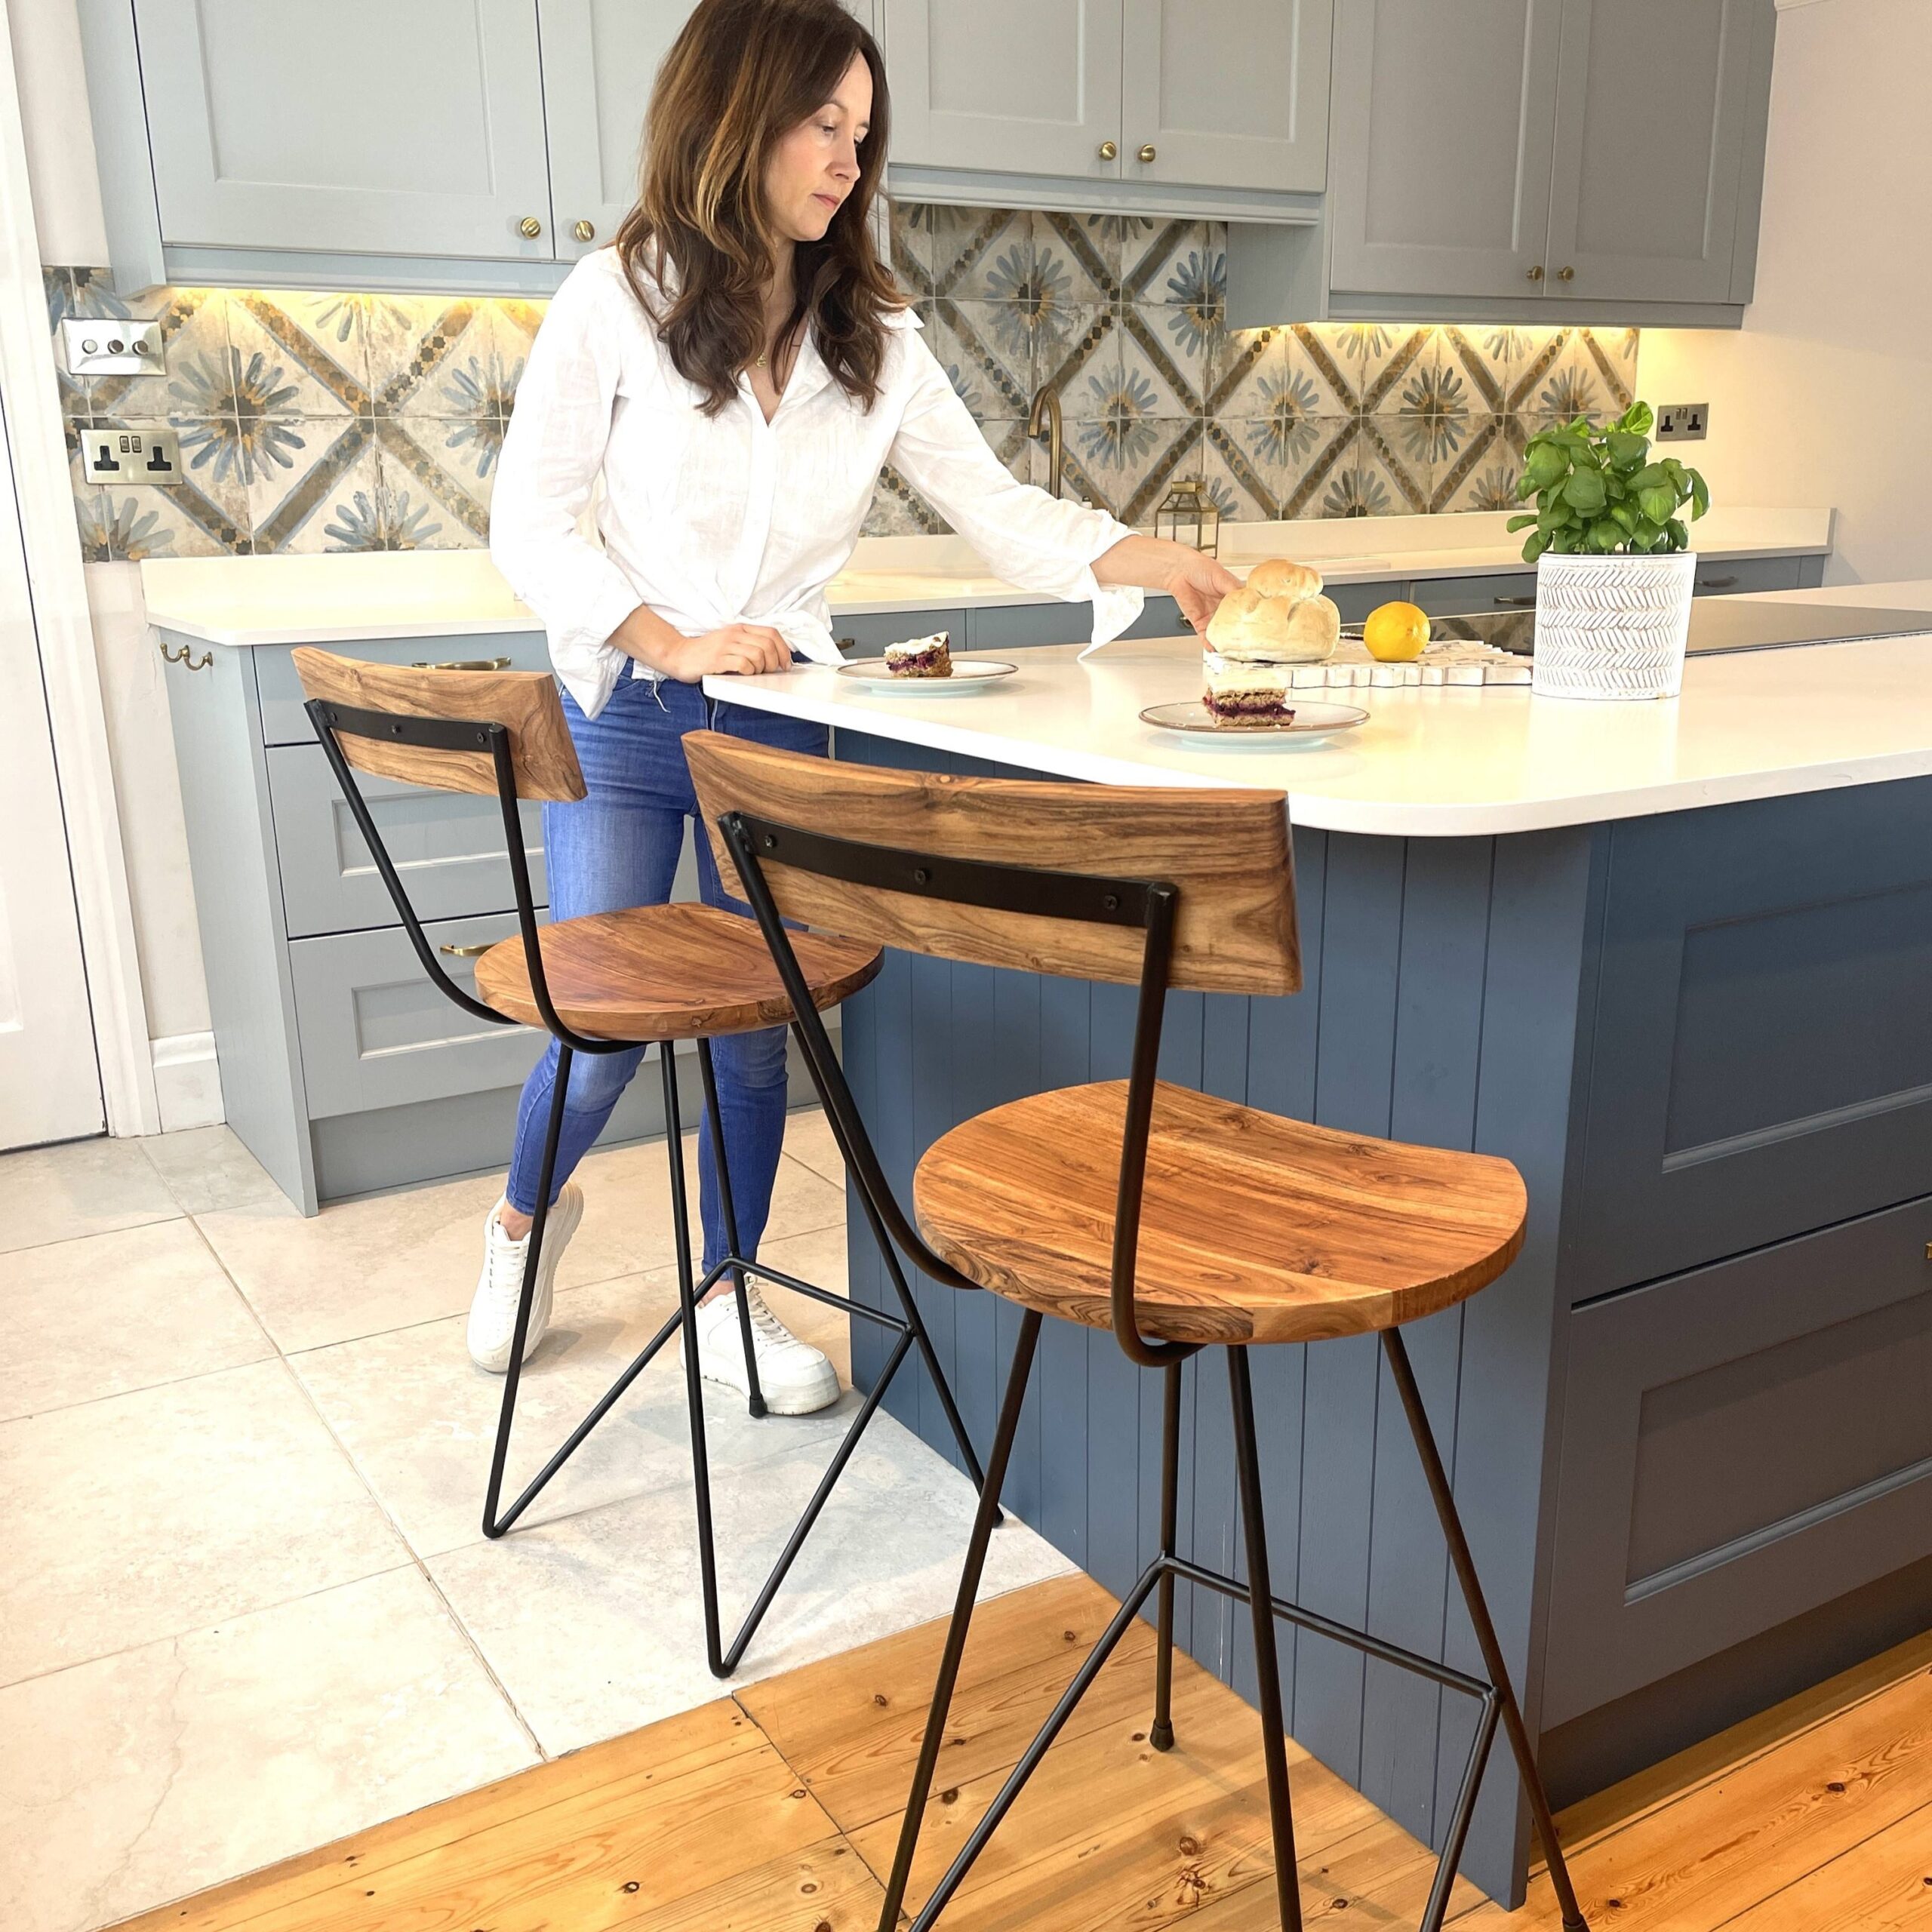 Industrial bar stools with wood in kitchen setting with woman by blue kitchen island